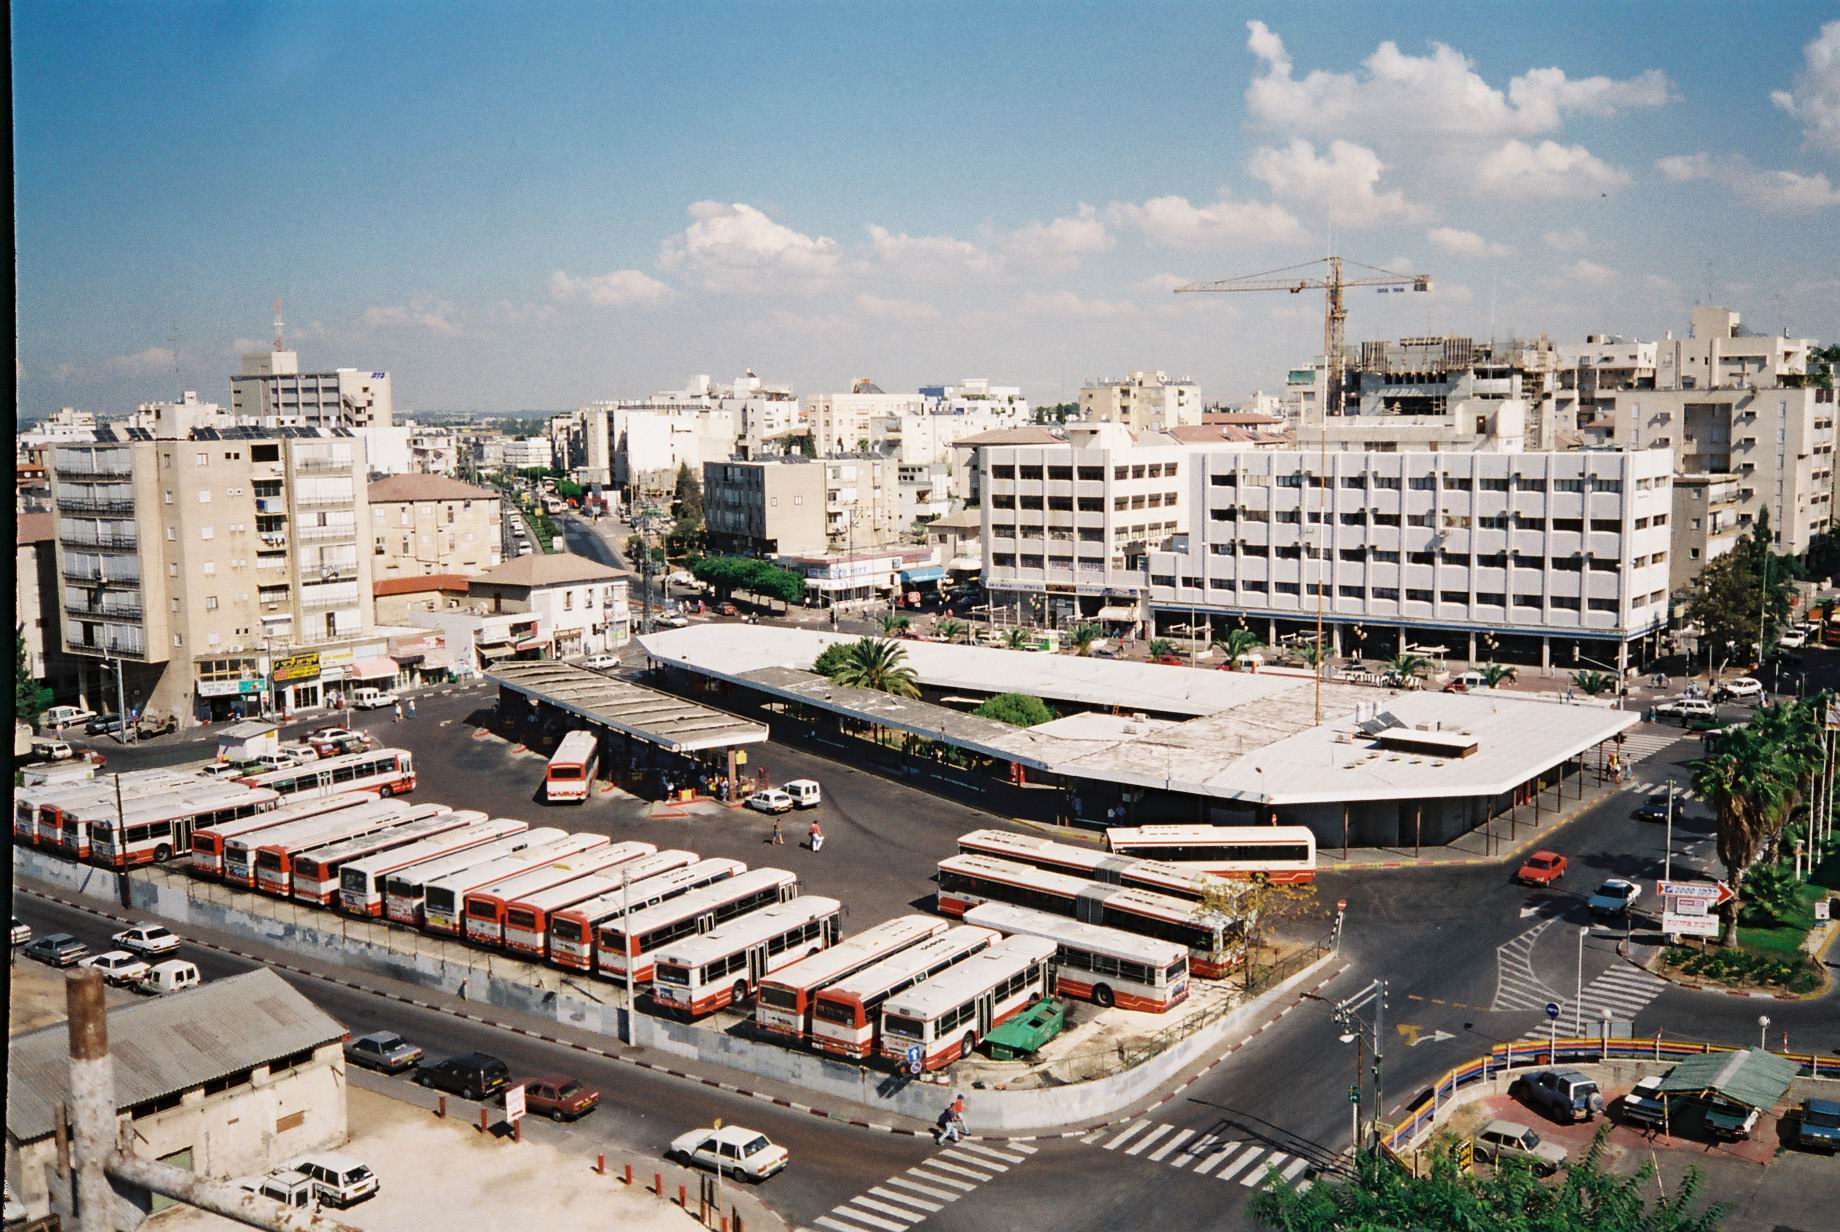 Old Central Bus station